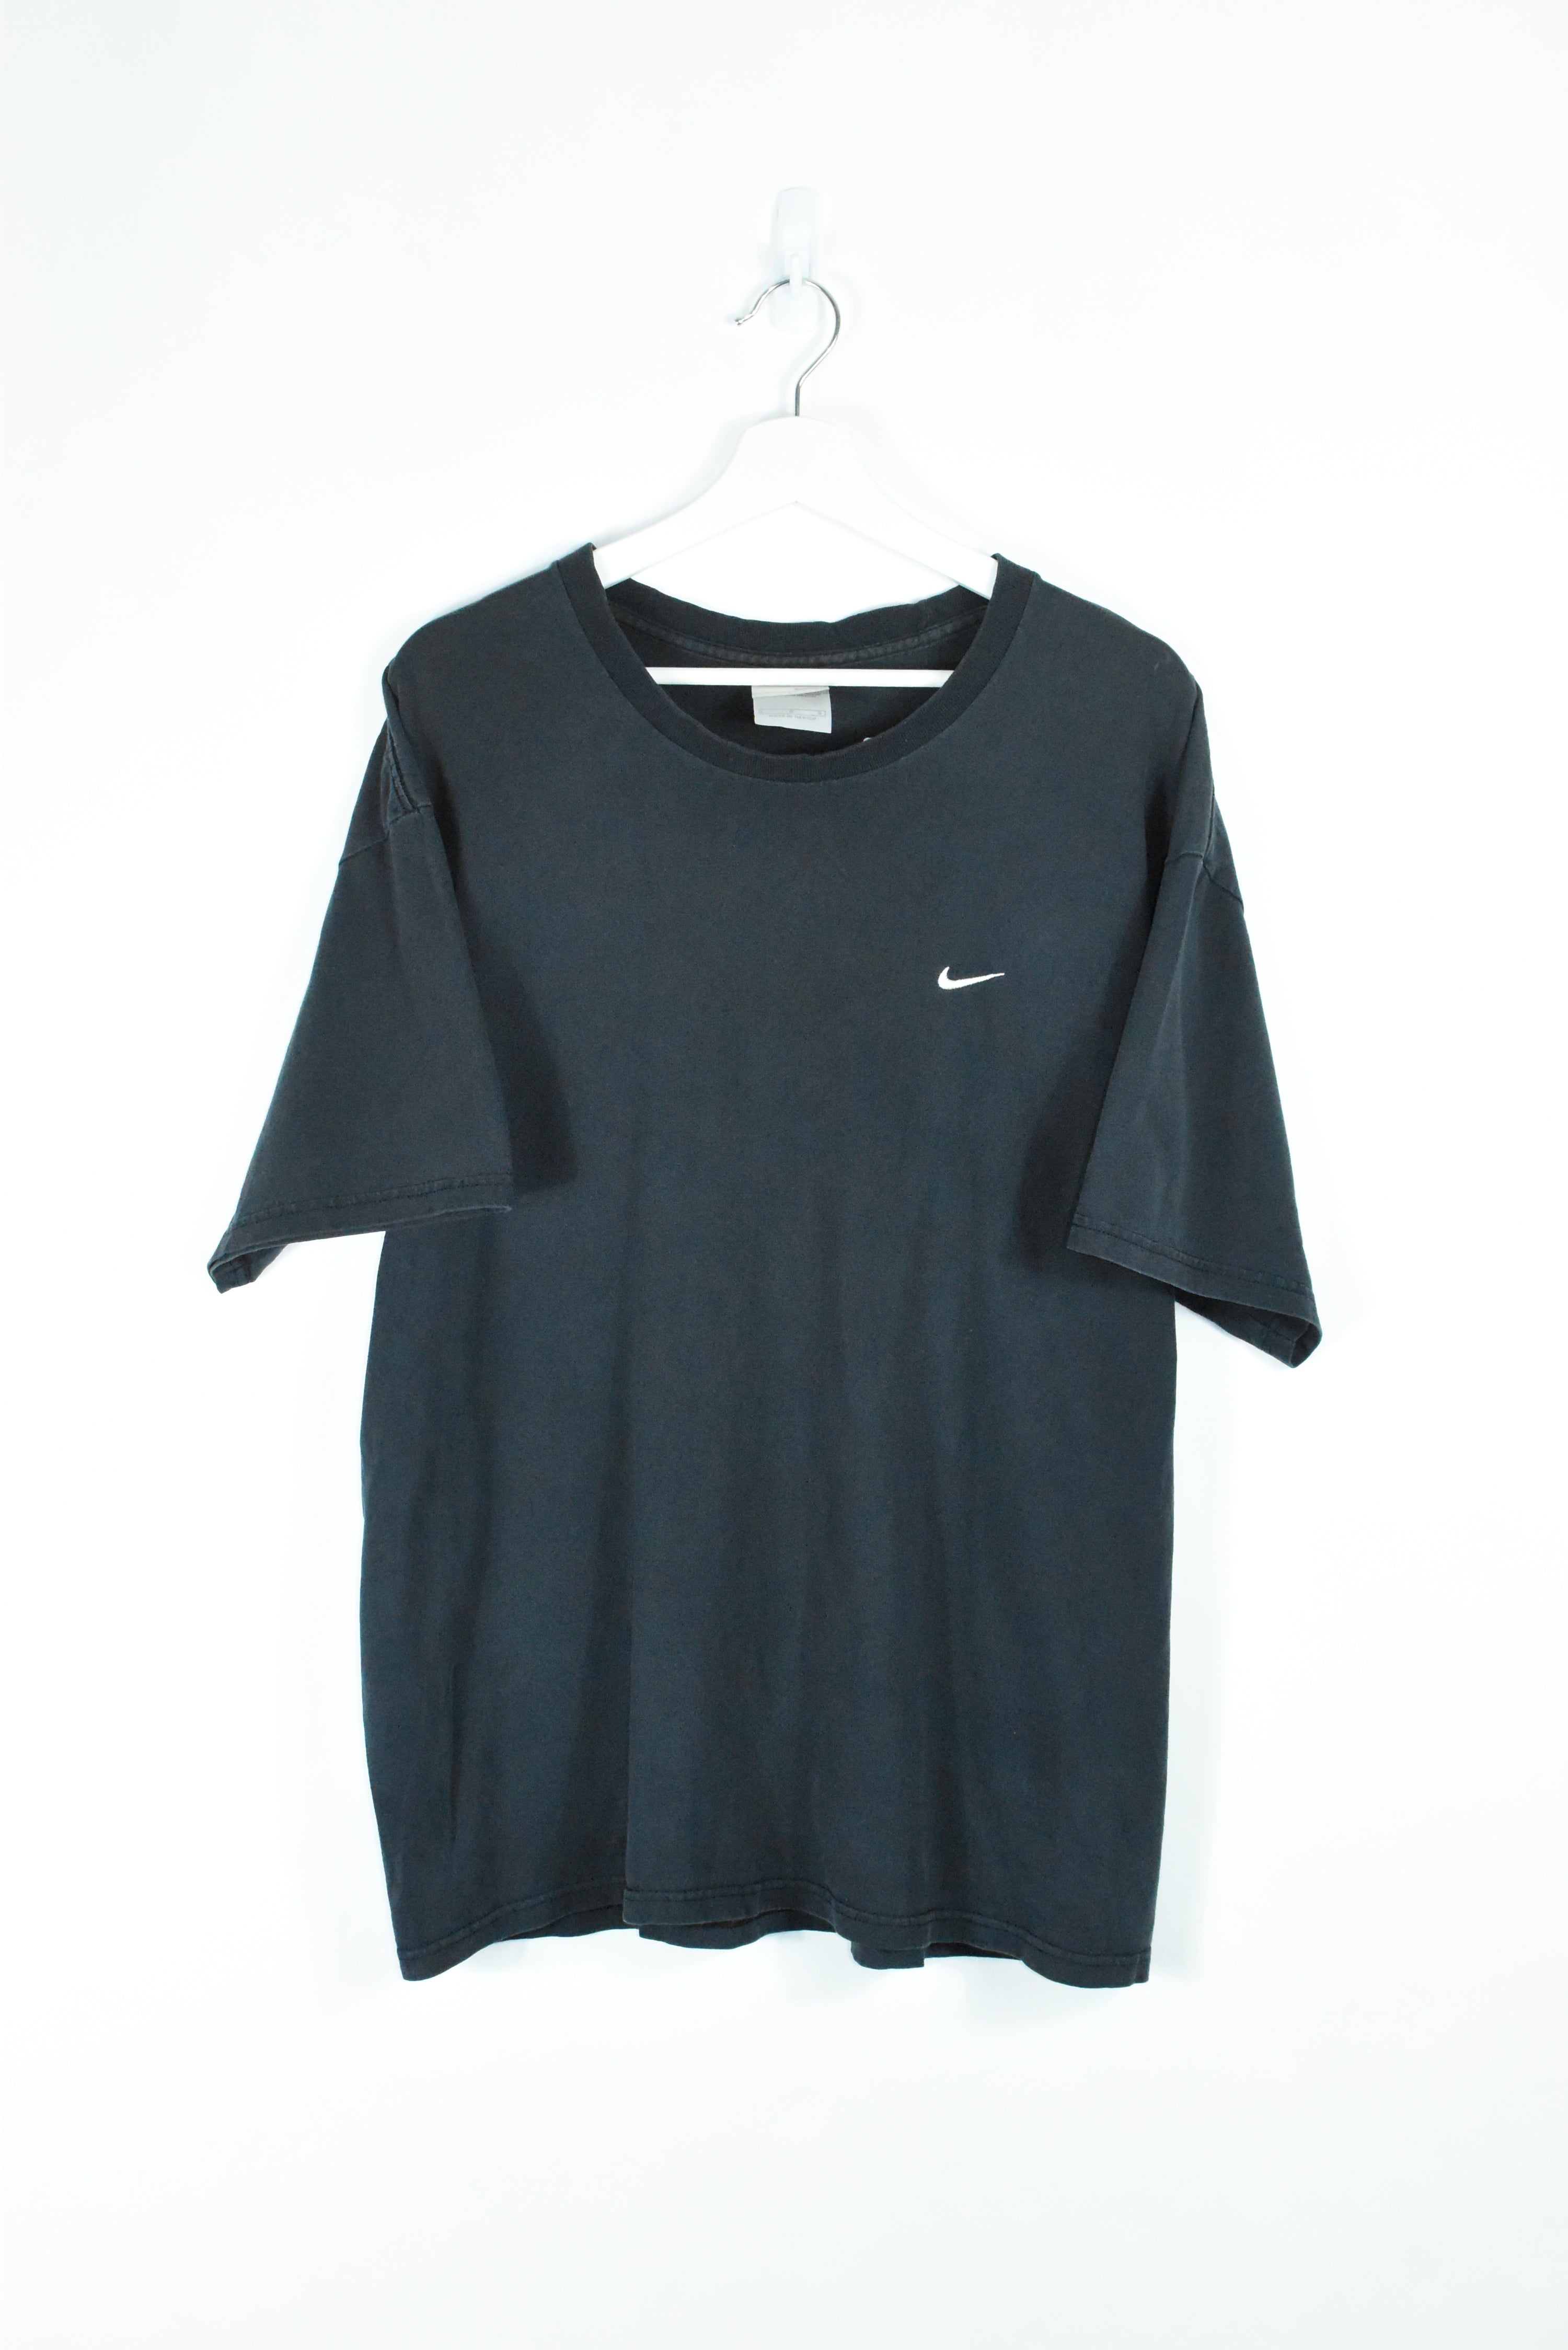 Vintage Nike Small Swoosh Embroidery T Shirt XLARGE